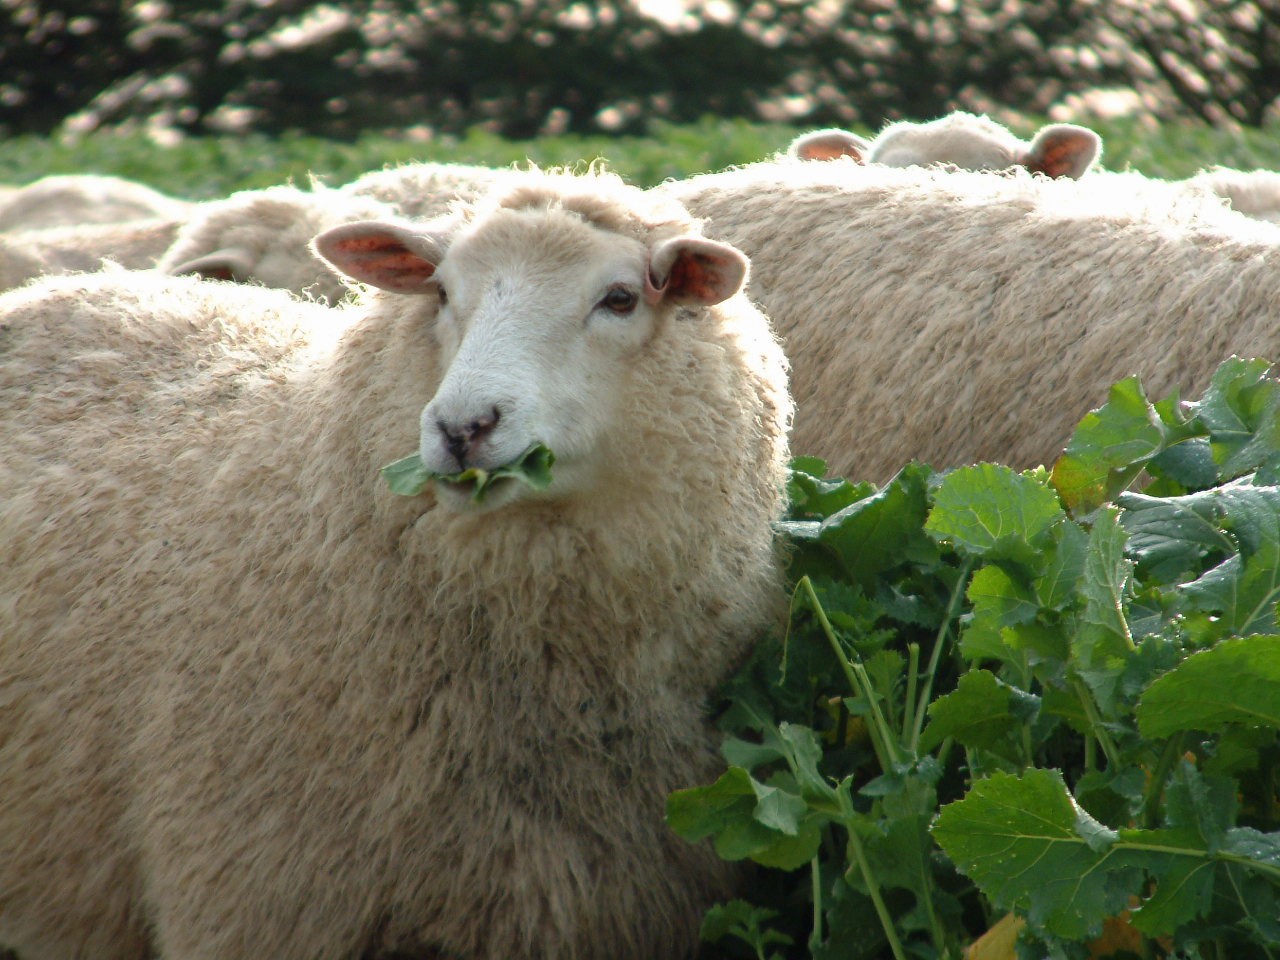 sheep eating grass in a field